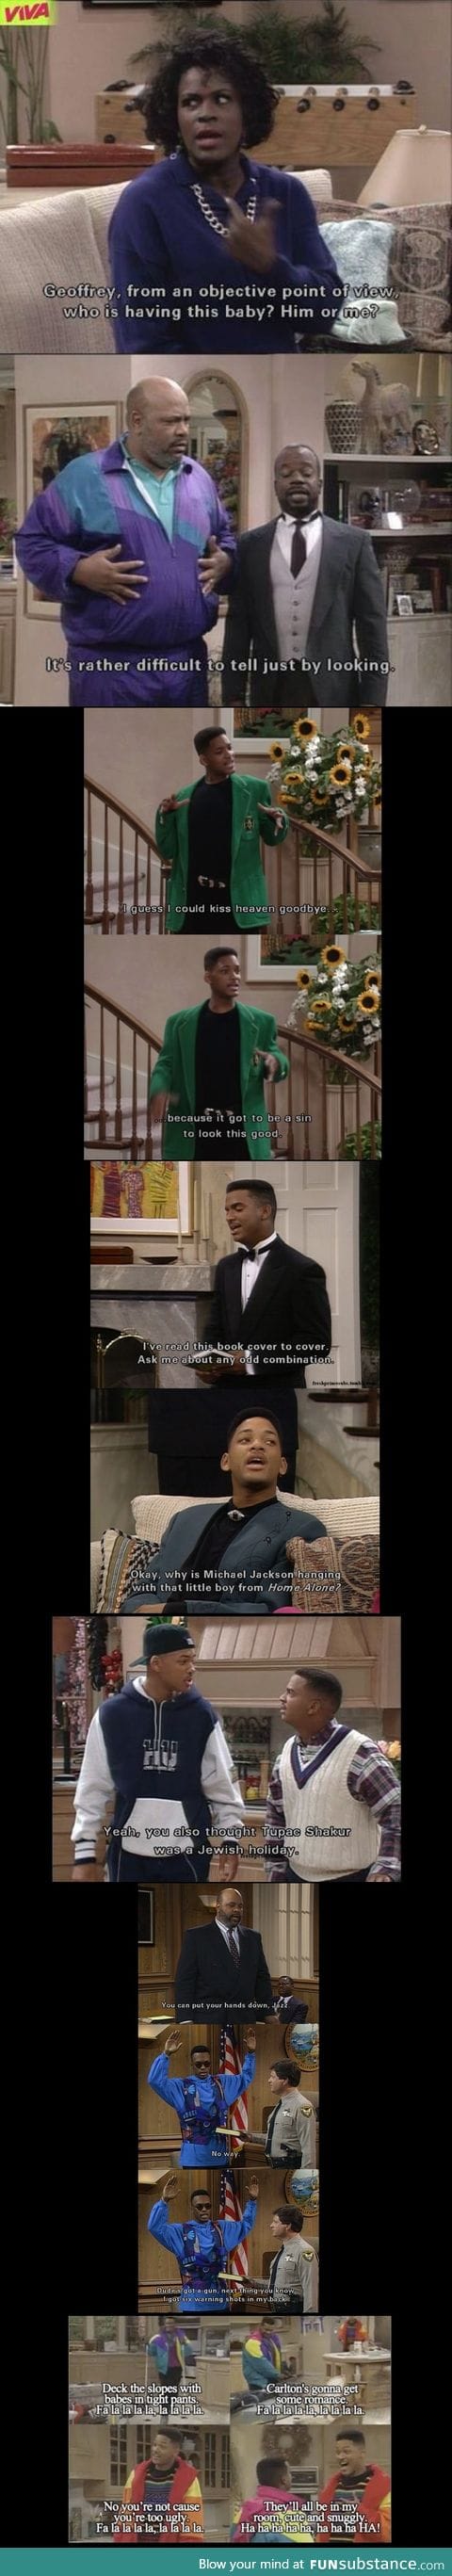 another fresh prince one!